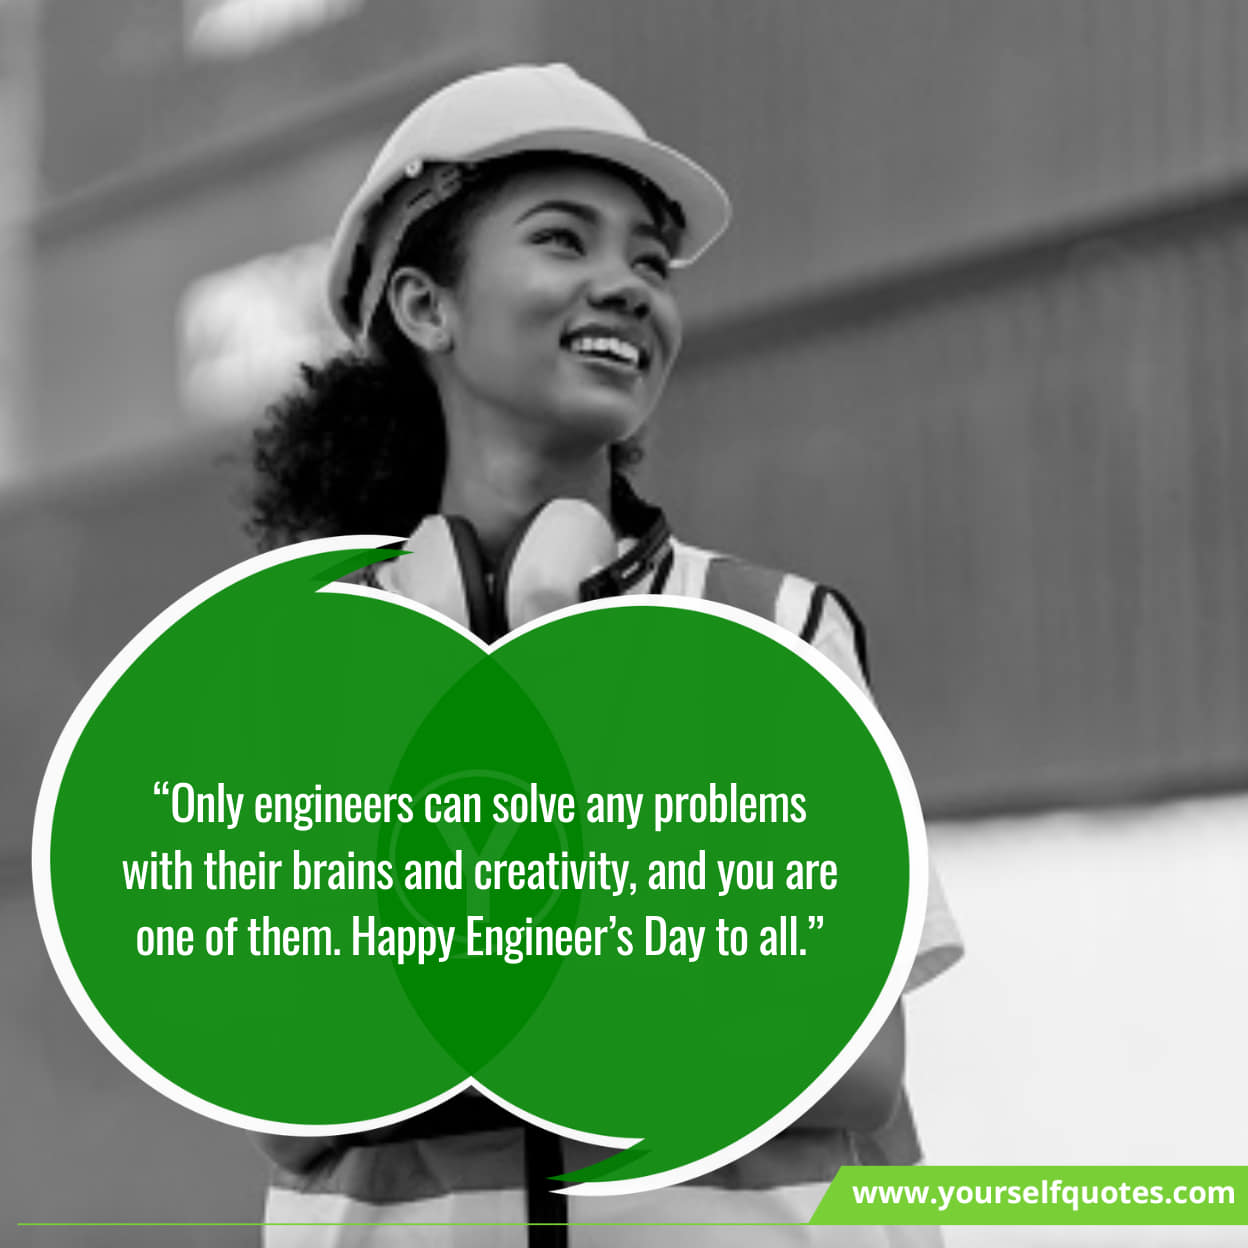 Quotes On Happy Engineers Day